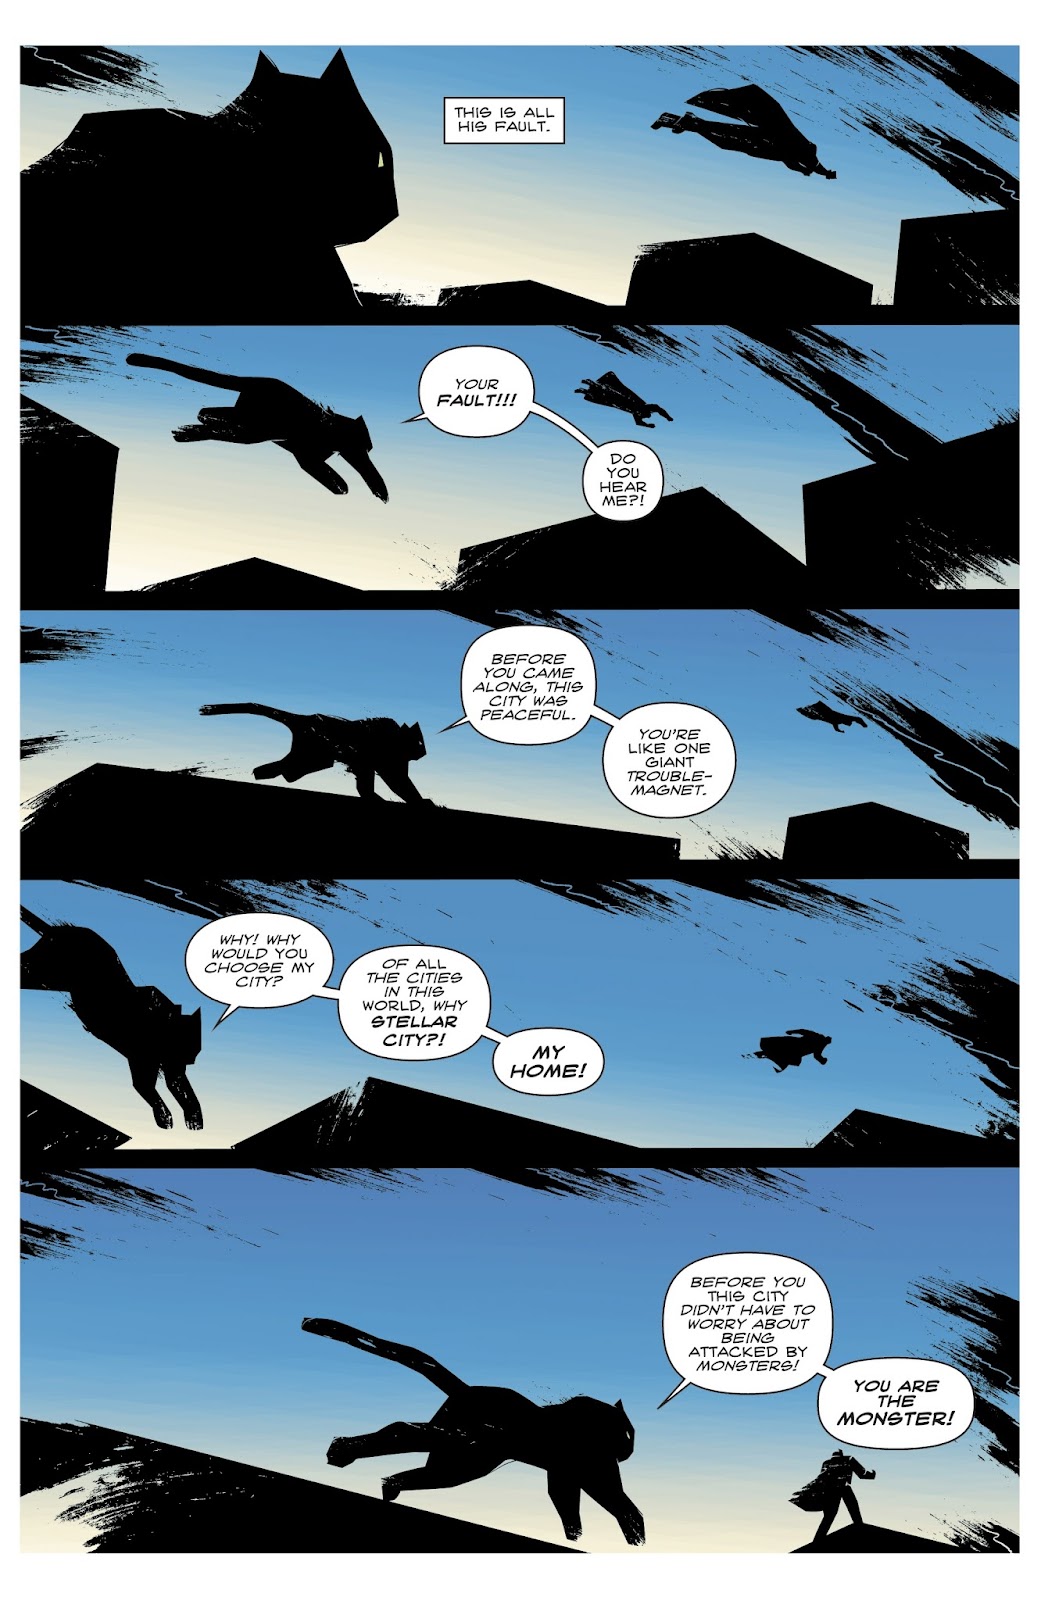 Hero Cats: Midnight Over Stellar City Vol. 2 issue 3 - Page 16